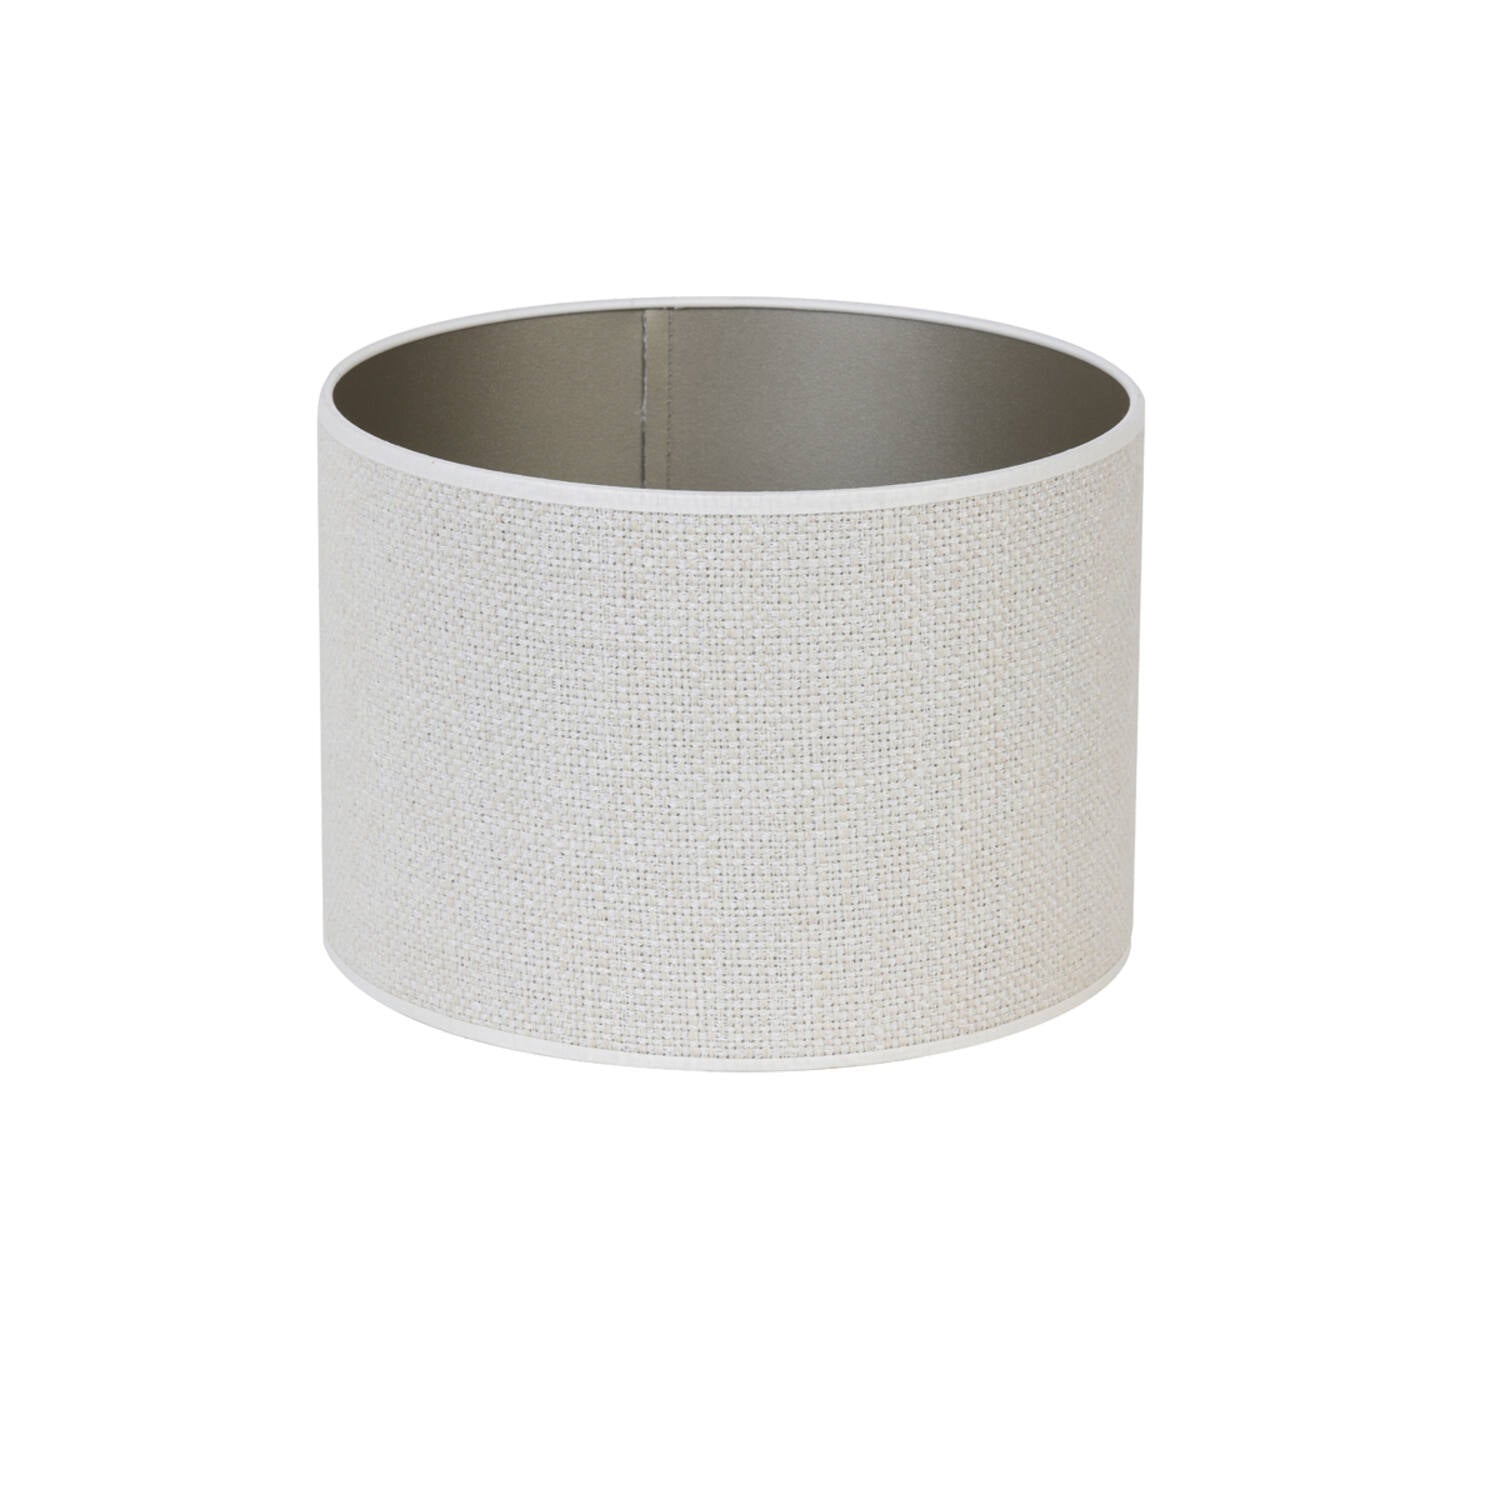 Off white textured lamp shade, showing inside too.